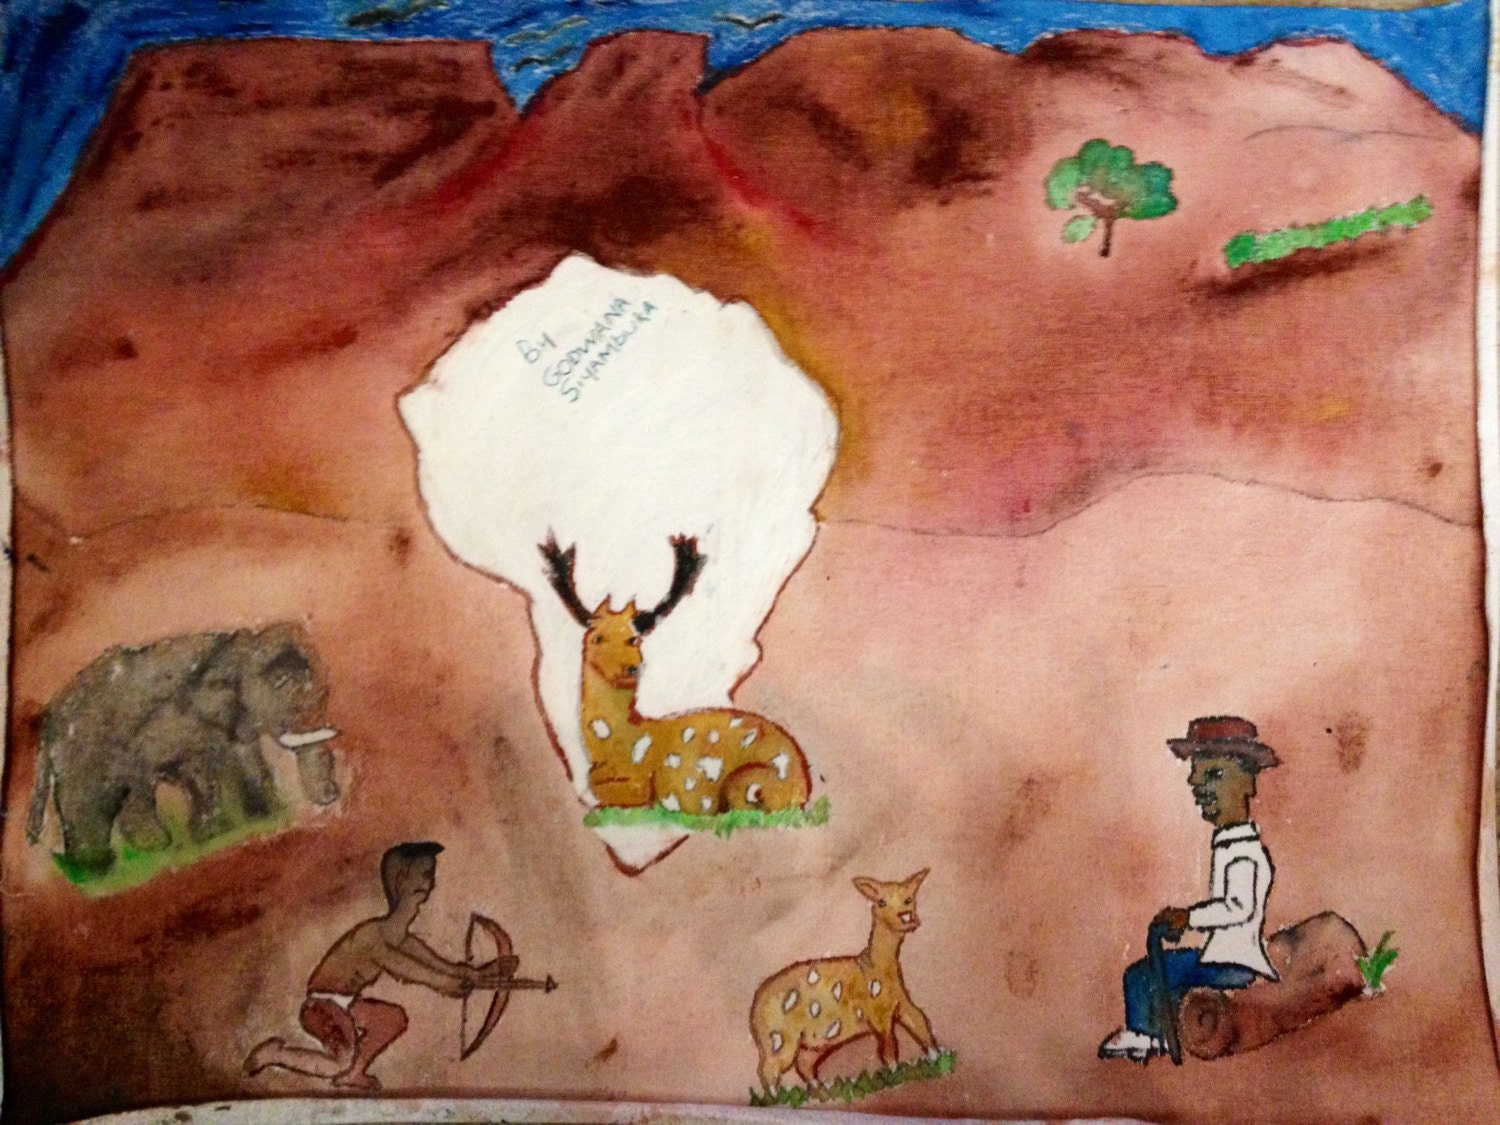 Original painting by a South African Child - LovetoLanga